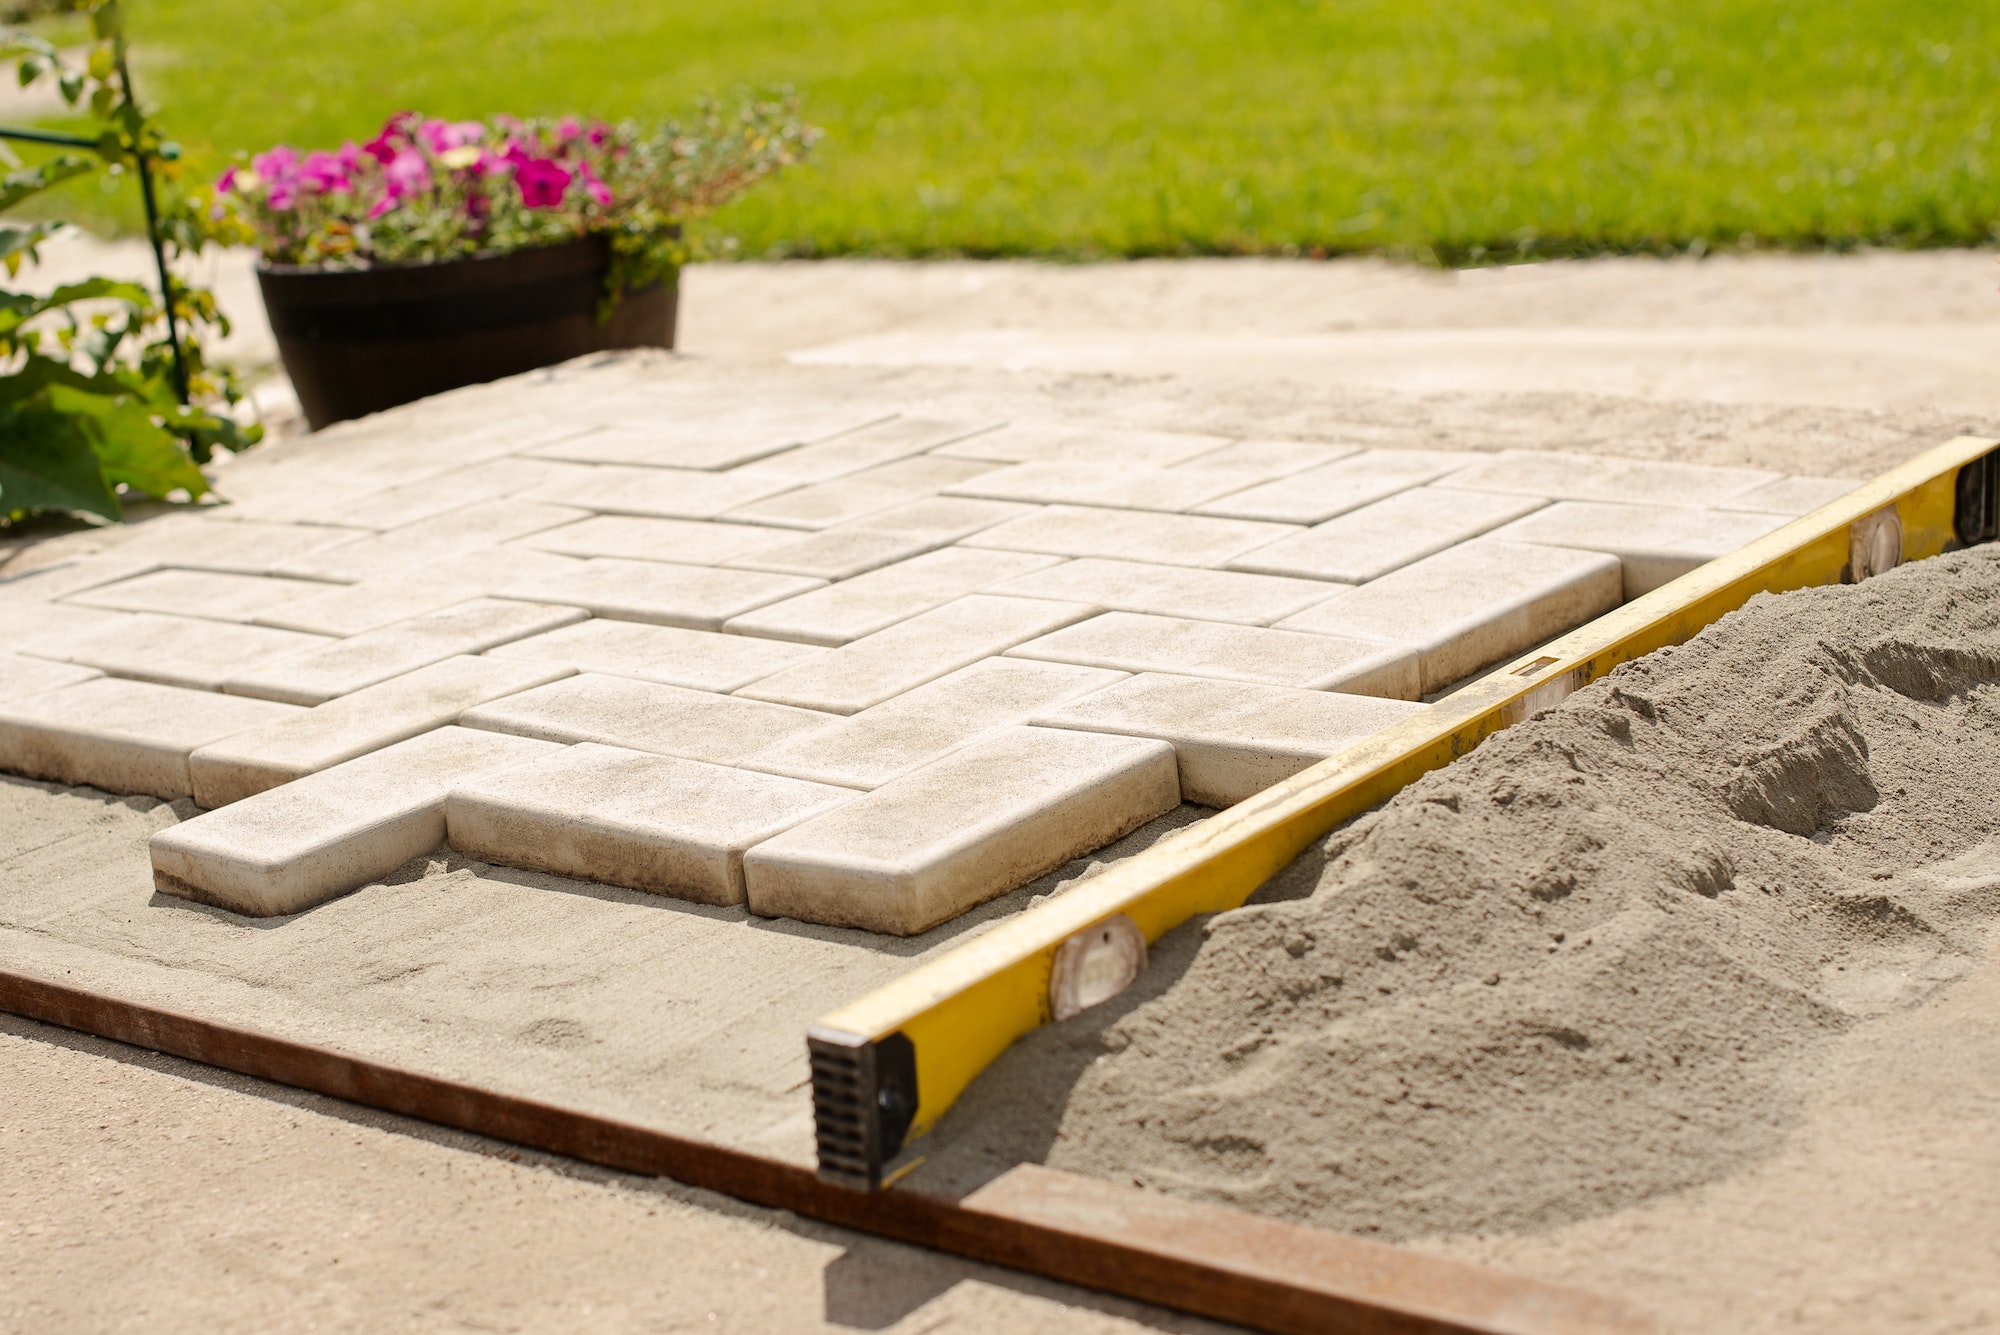 The master lays paving stones in layers. Garden brick pathway paving by professional paver worker.